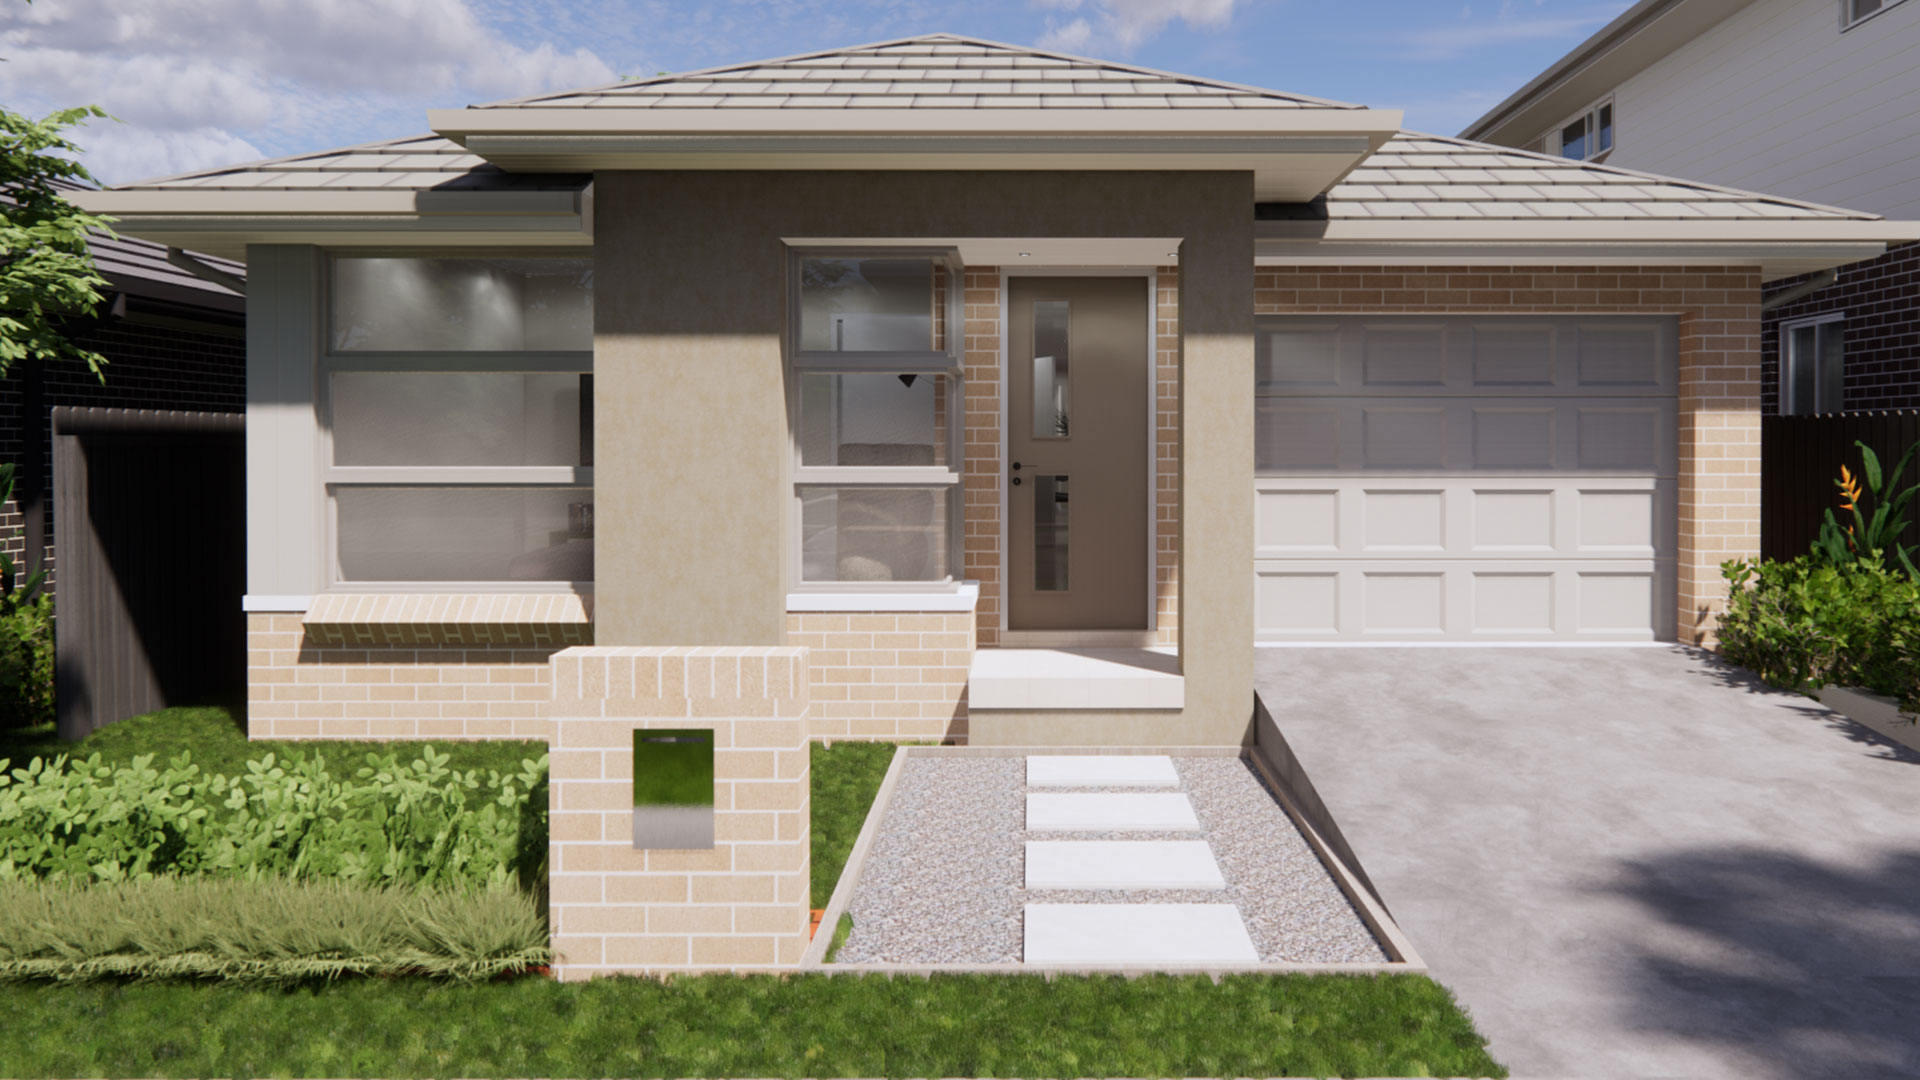 Lot 8084 Pipehorse Street, New Park, NSW 2474